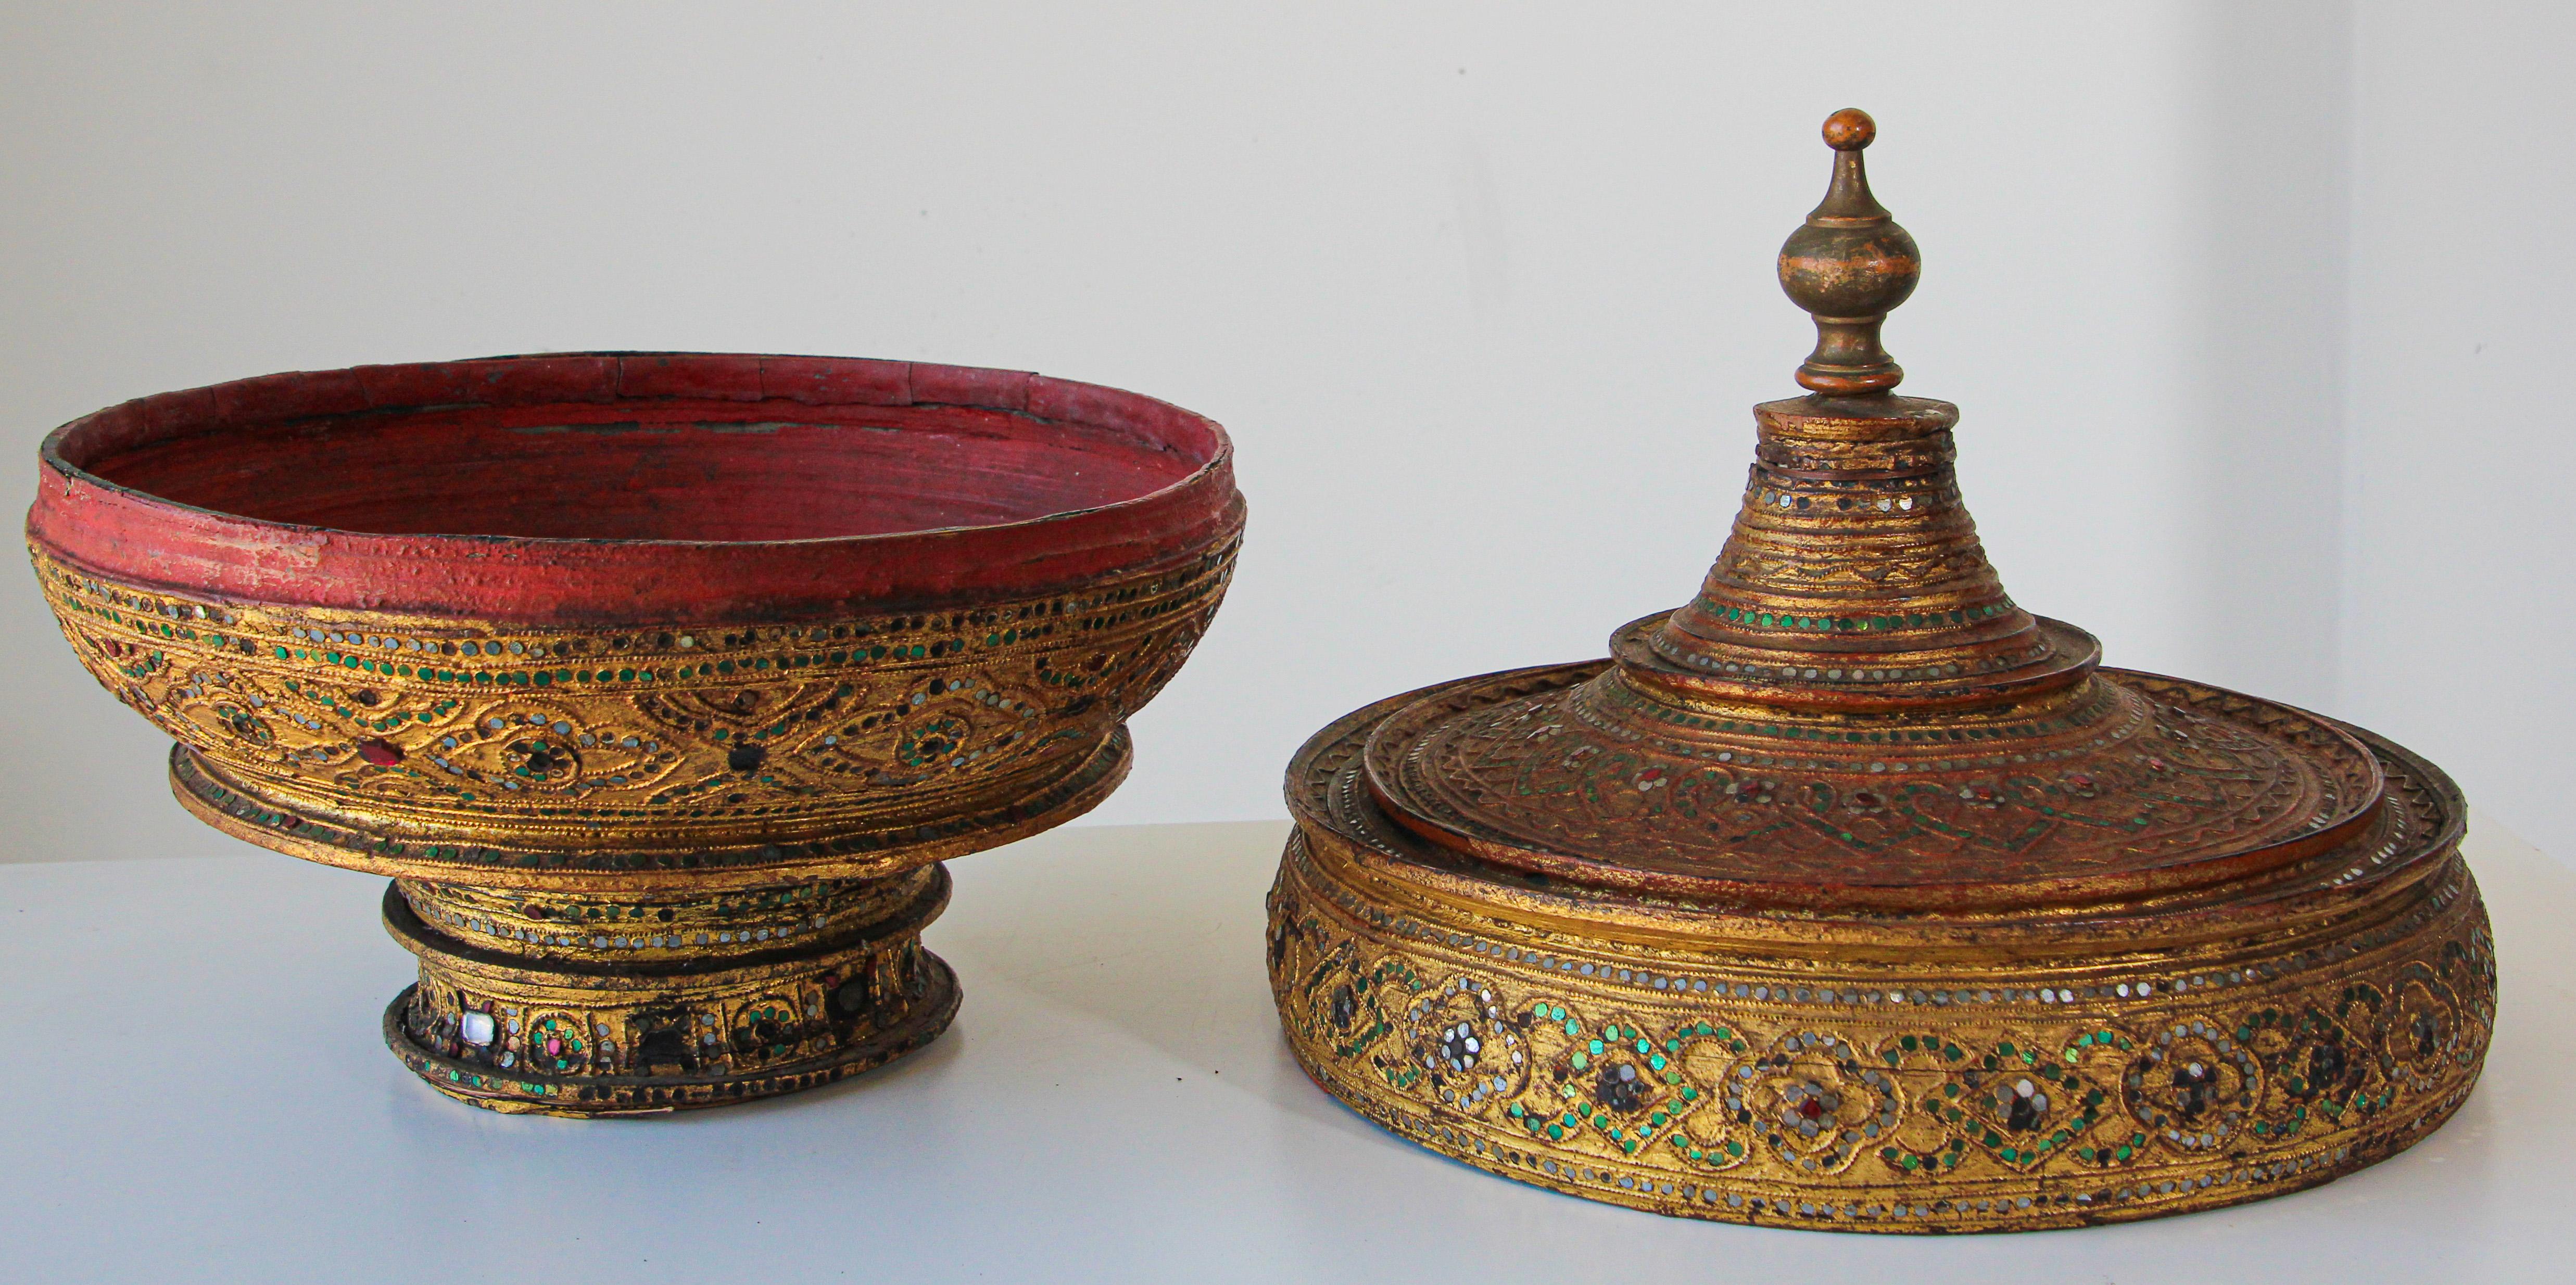 Large Burmese Gilt and Lacquered Wood Temple Offering Basket 8